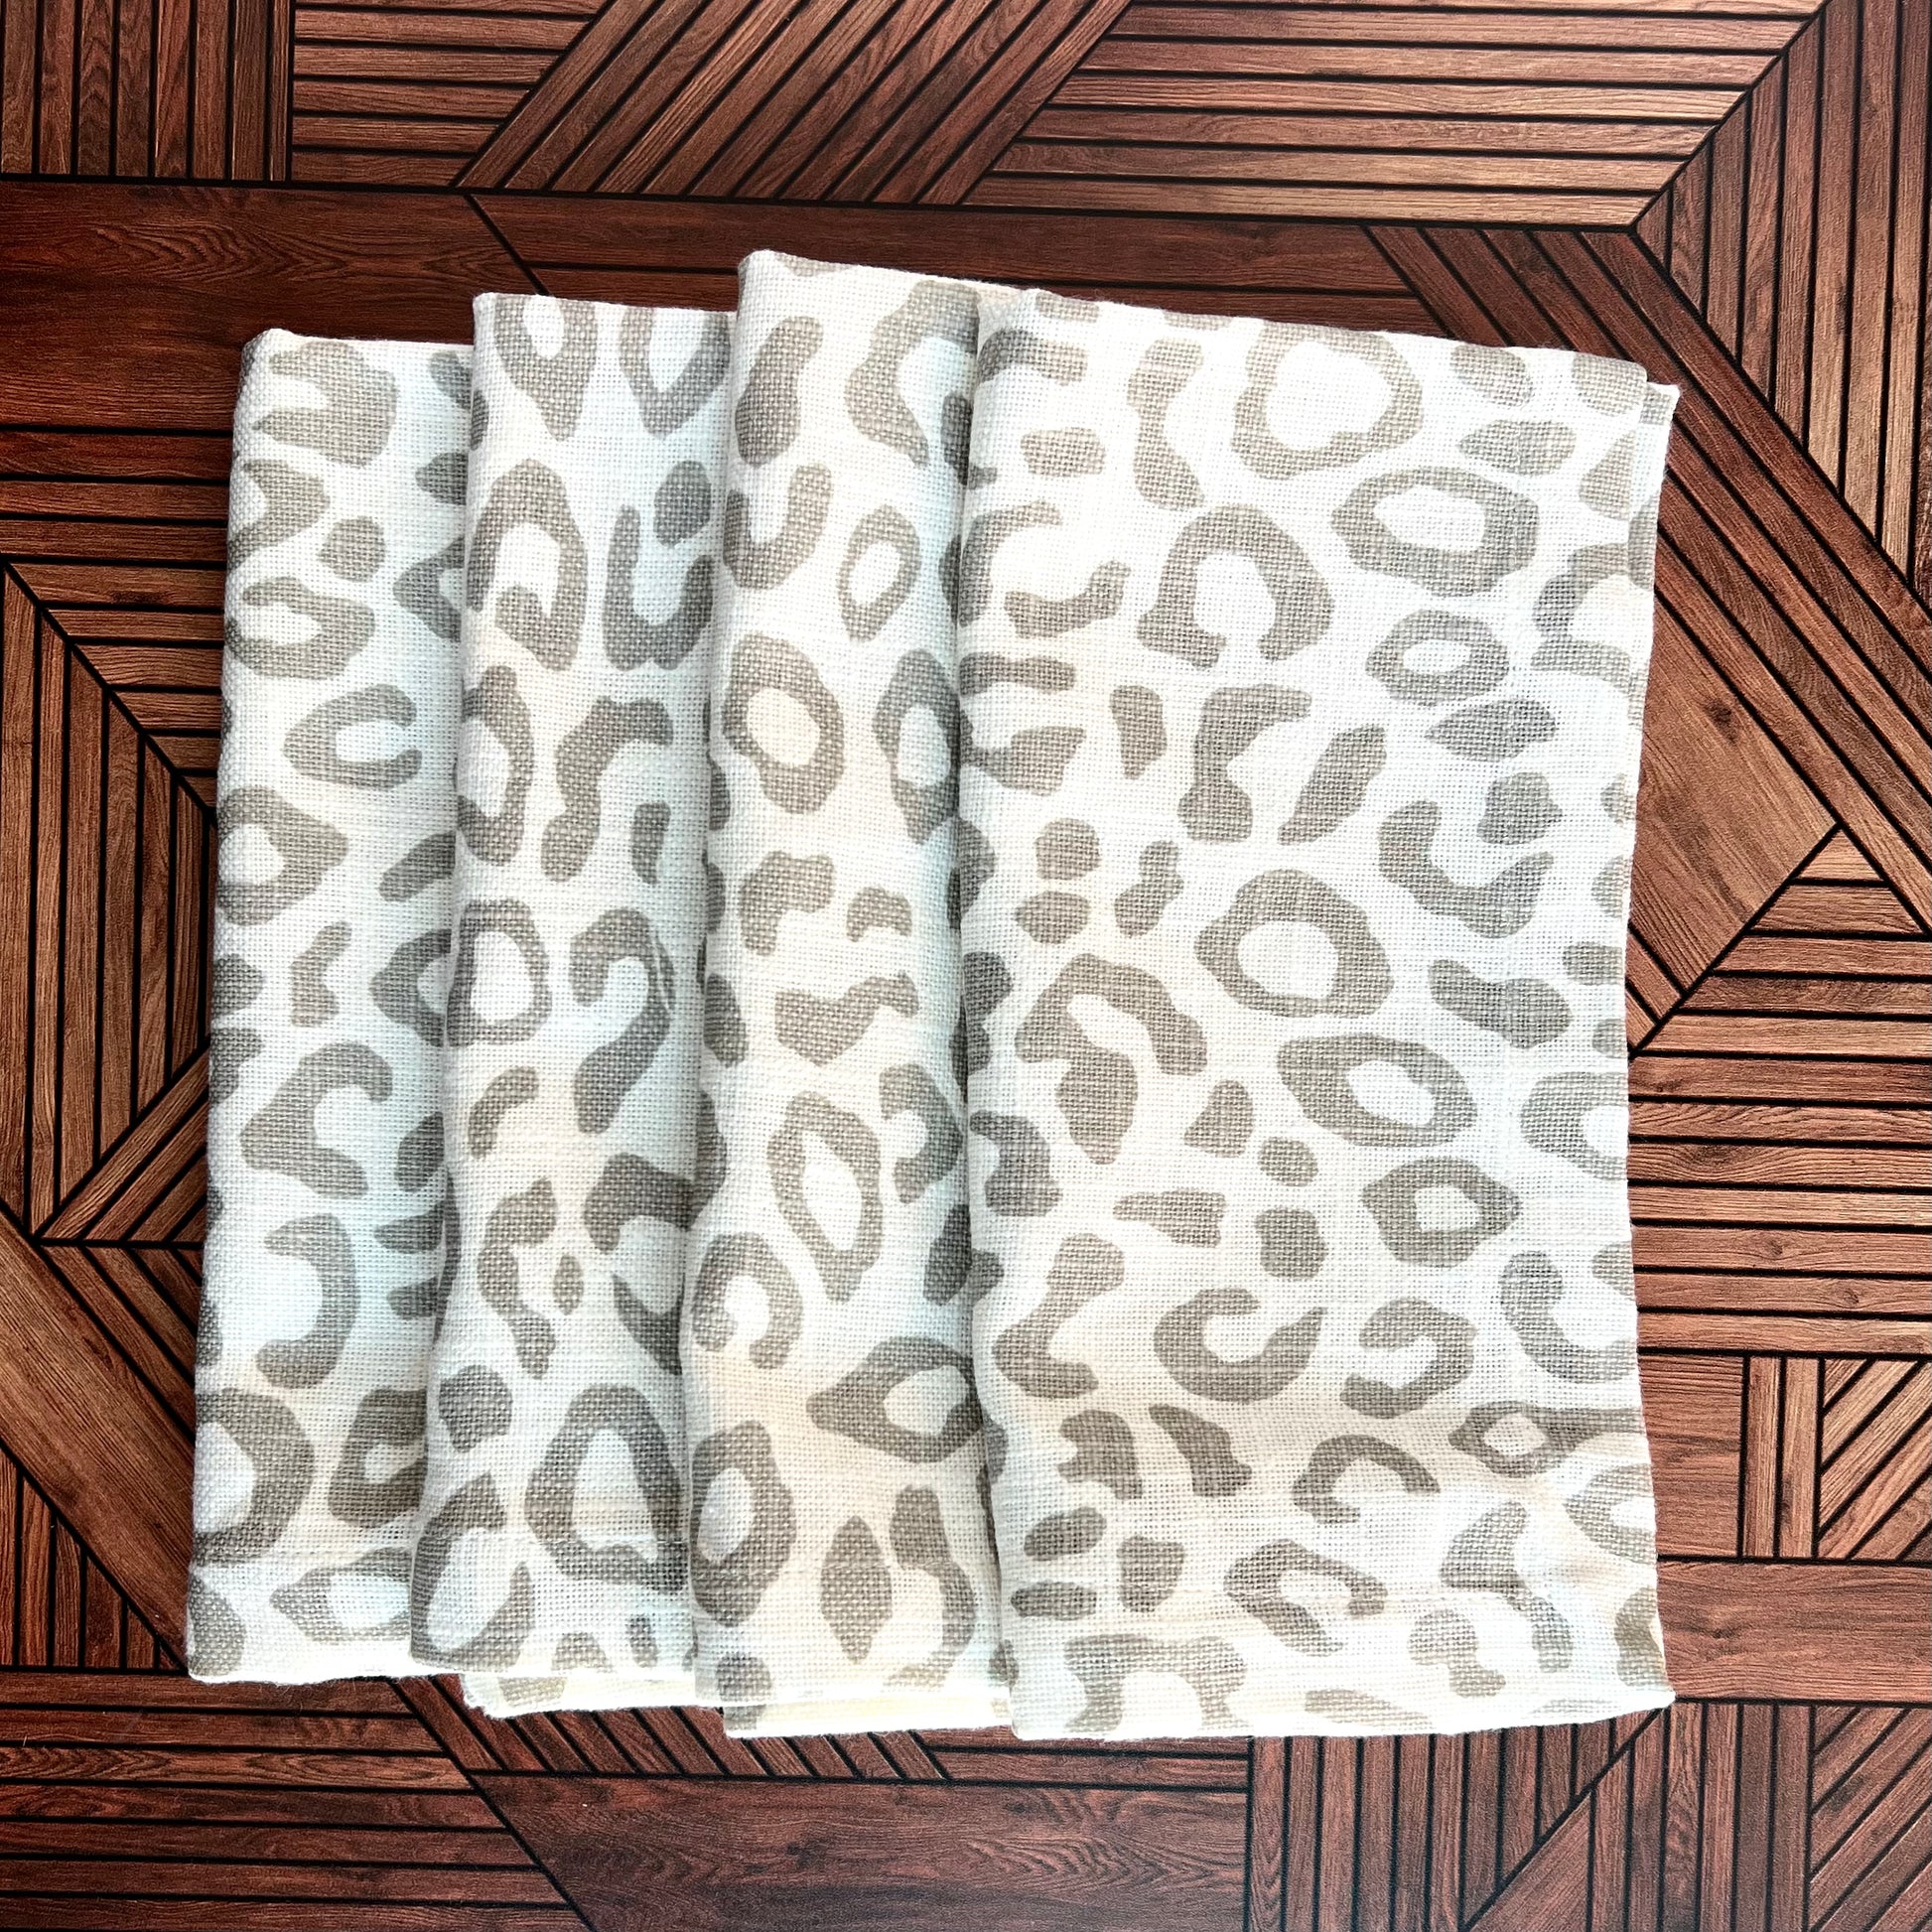 A set of four leopard print napkins stacked in an array against a brown wooden background